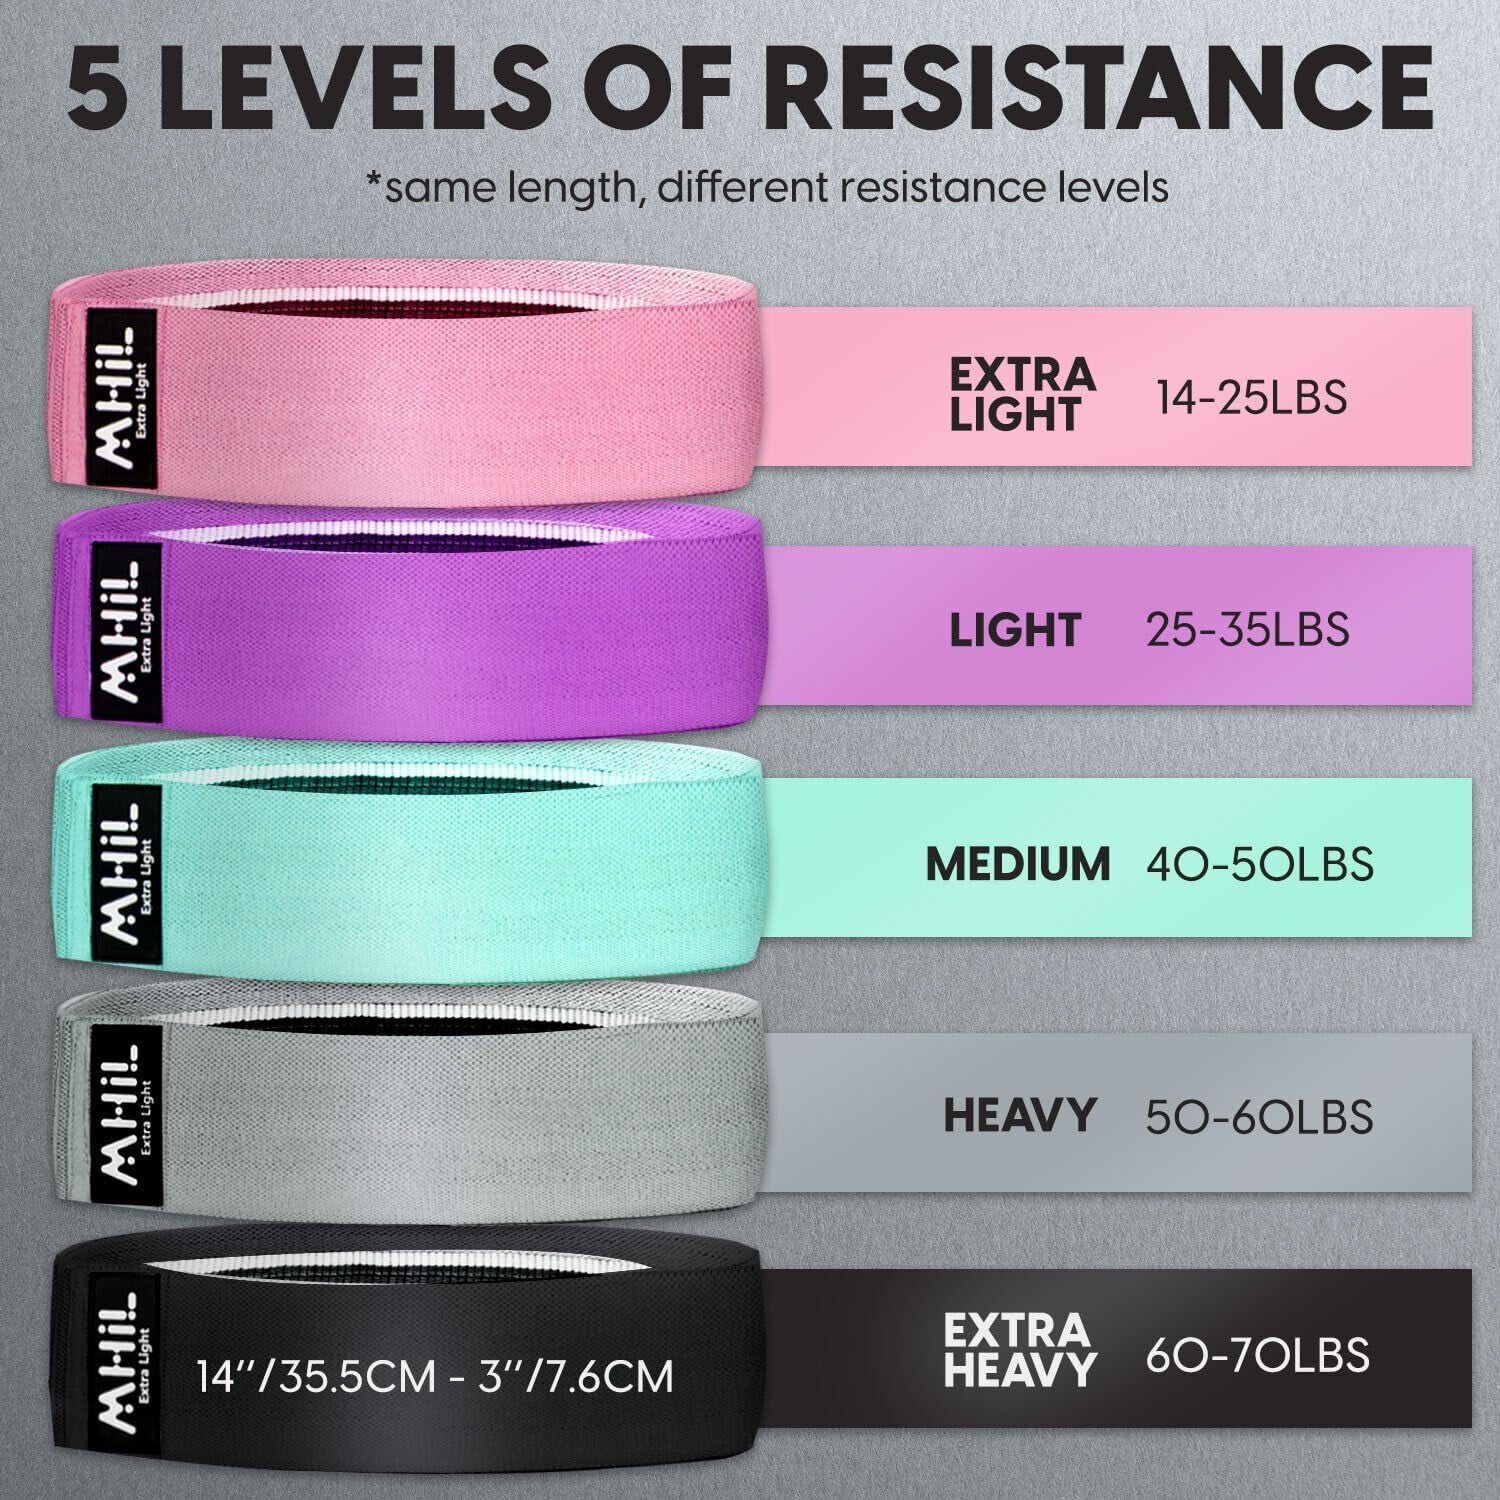 Fabric Resistance Bands for Working Out - 5 Booty Bands for Women and Men, Best Exercise Band Workout Bands for Workout Legs Butt Glute Hip - Gym Loop Fitness Bands Set for Home with Training Guide